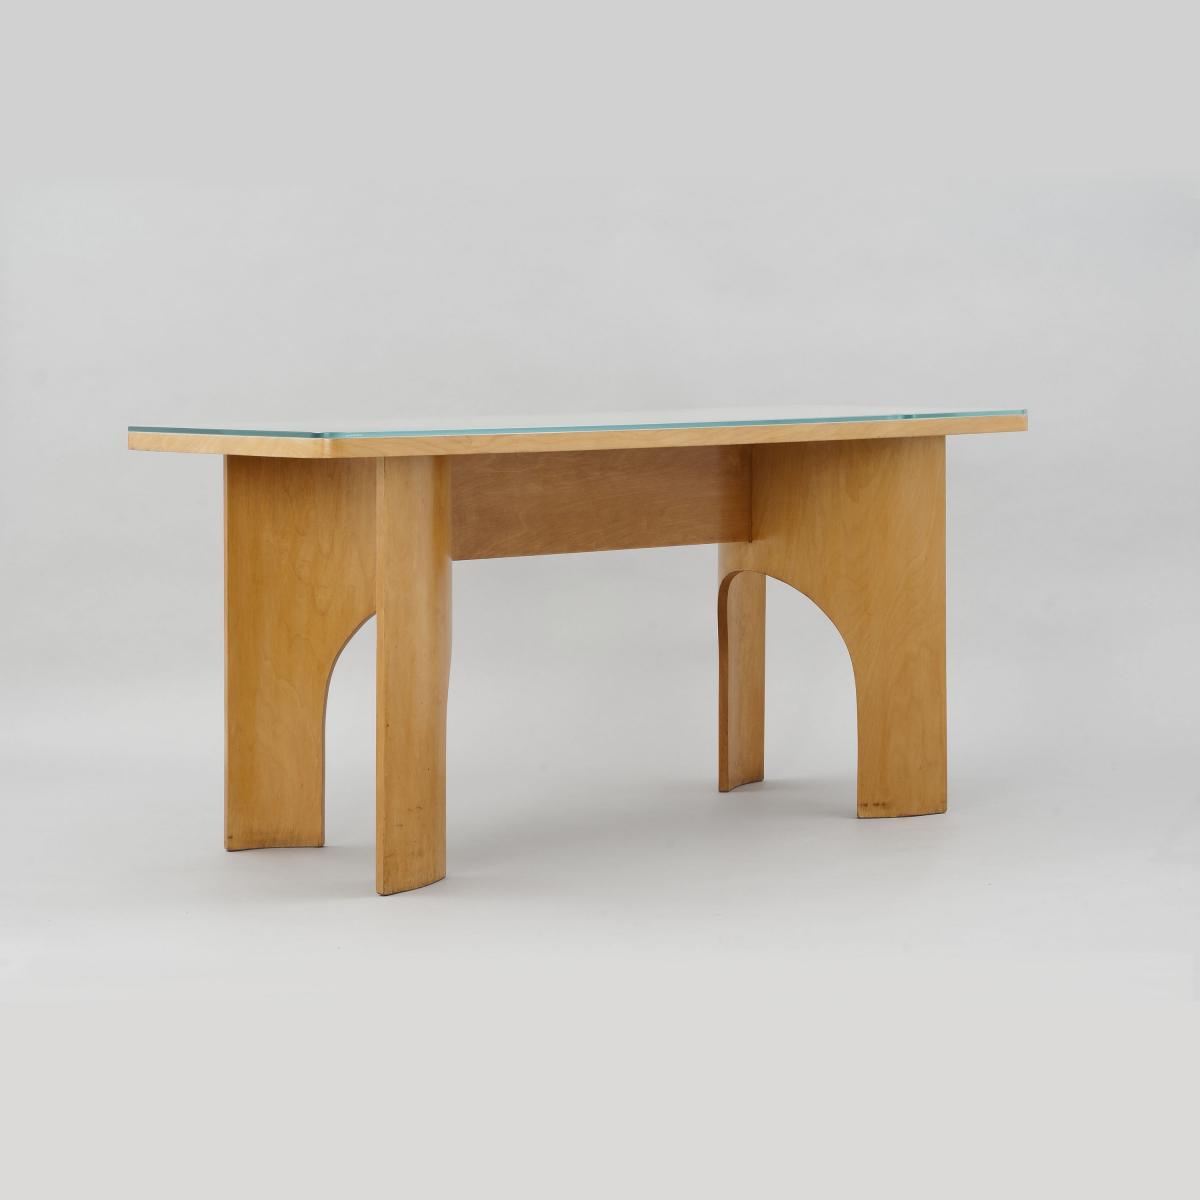 Gerald Summers Dining Table - Made by Makers of Simple Furniture (1931-1940)